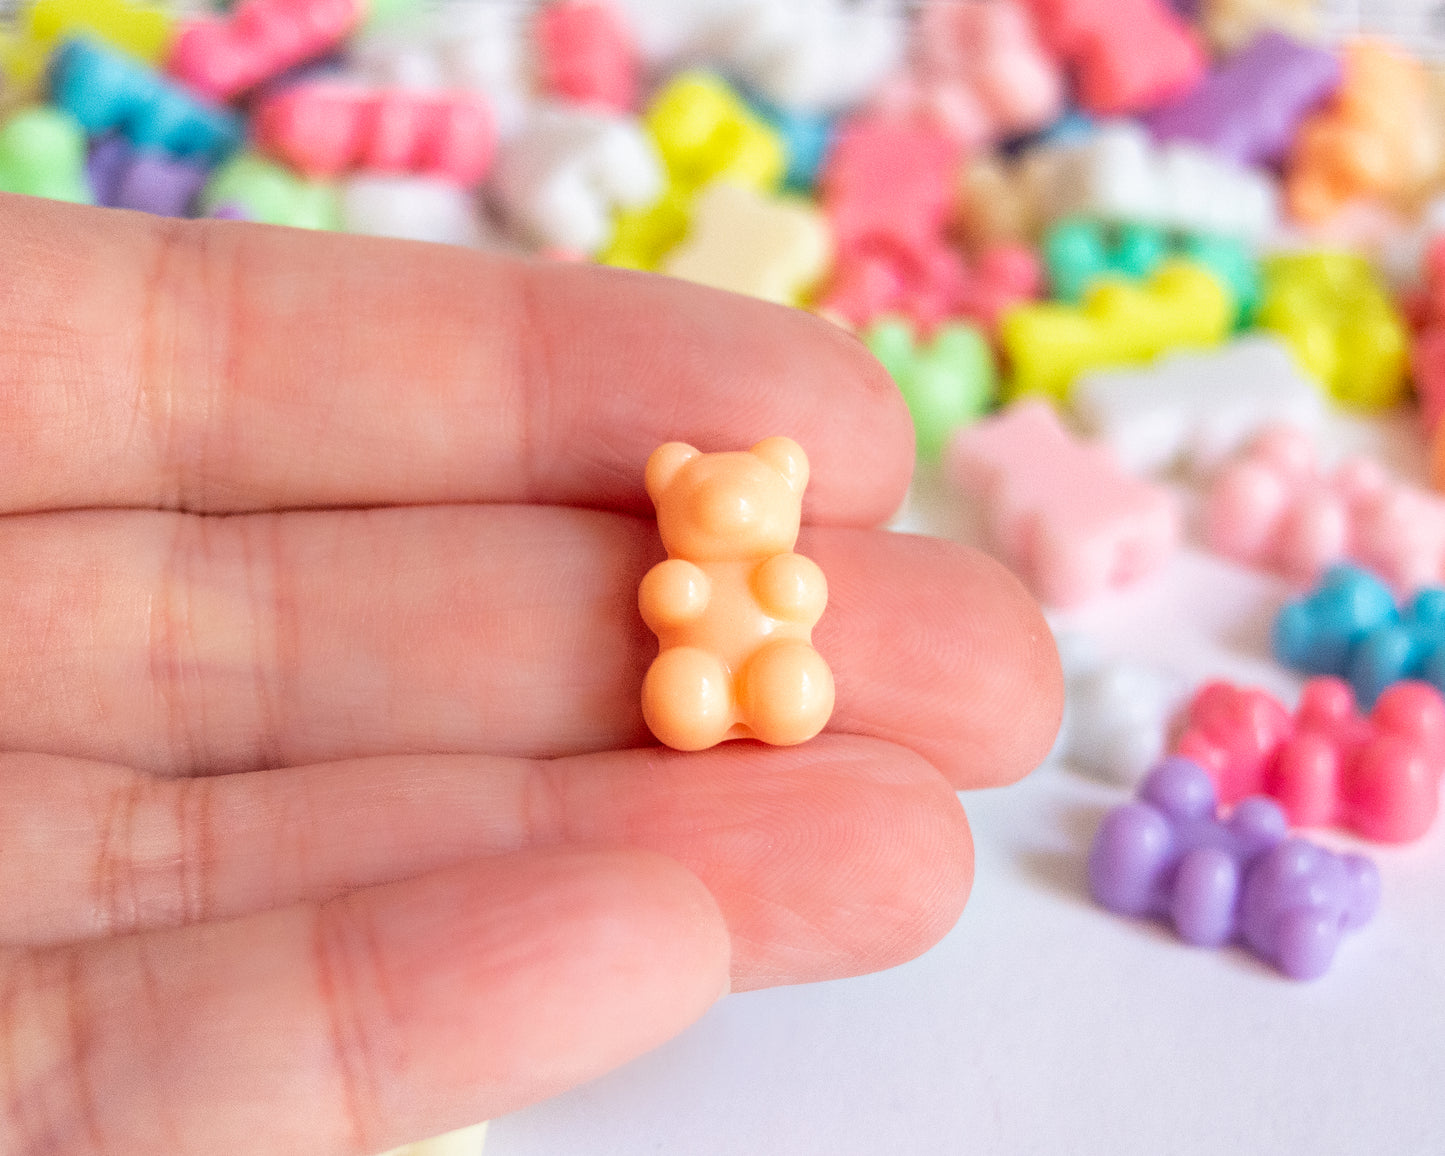 18x11mm Teddy Bear Beads in Pastel Colored Acrylic